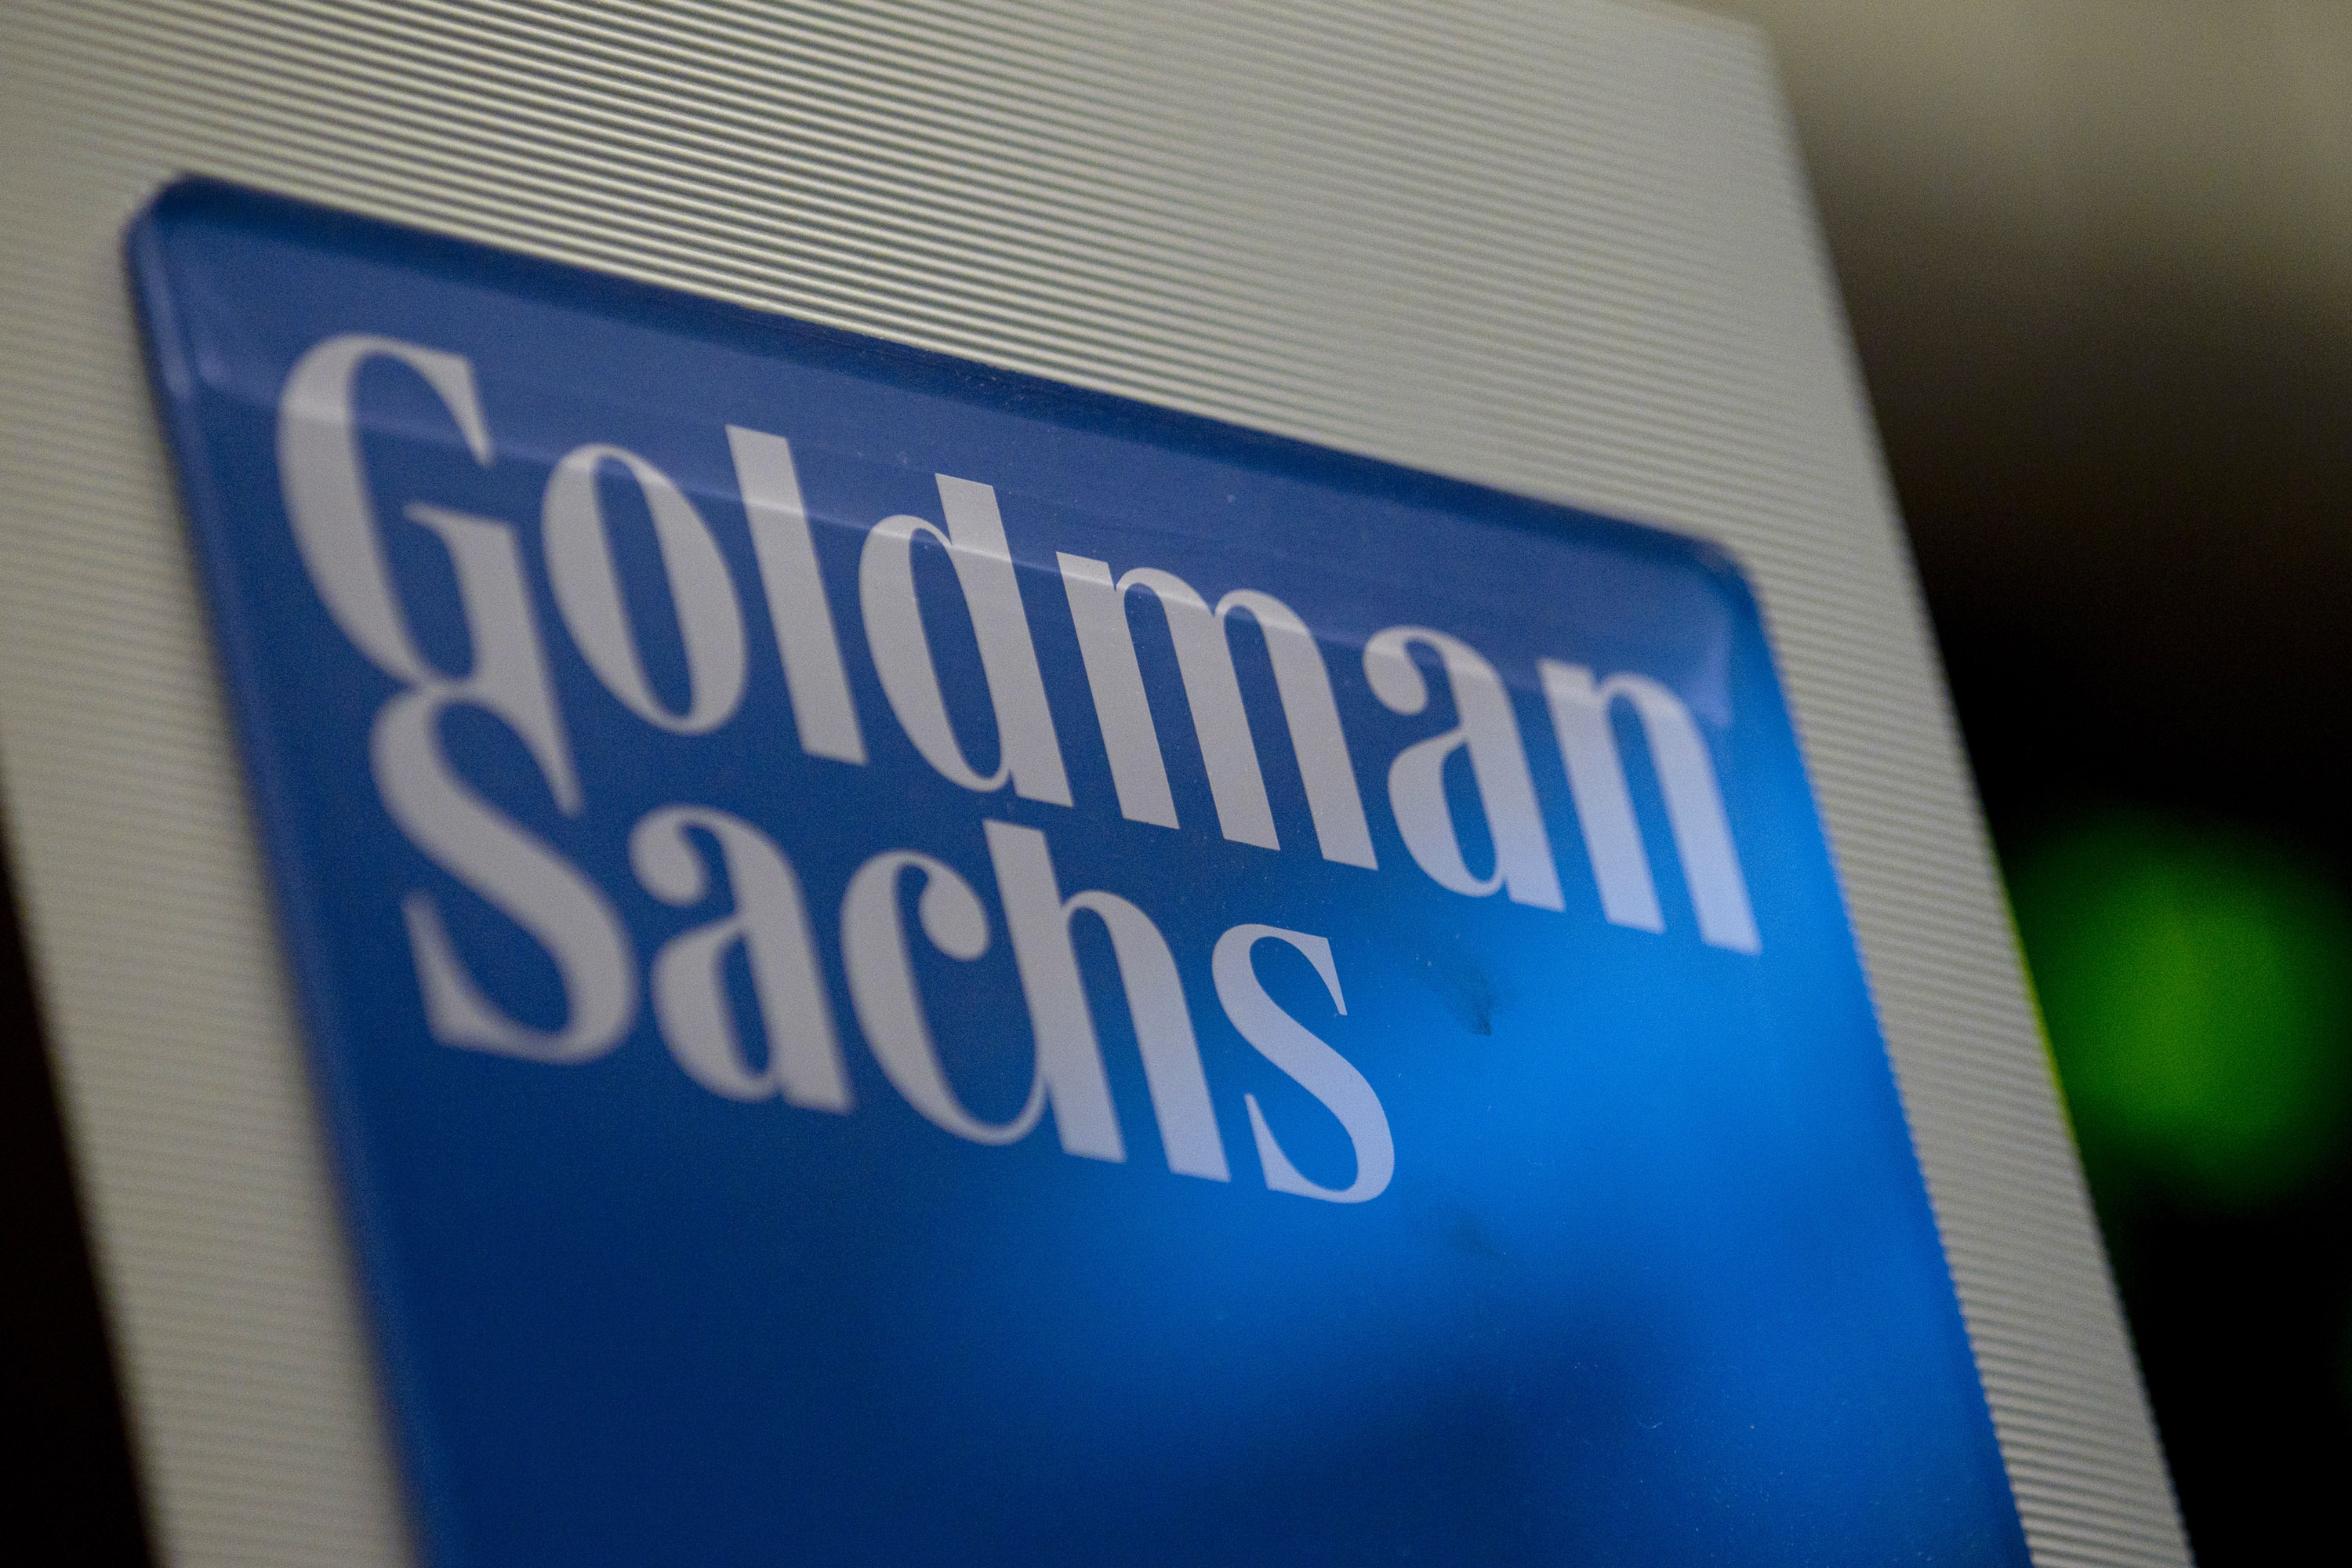 Goldman’s Asset Unit Overweight on Slovenia Bonds, May Buy More